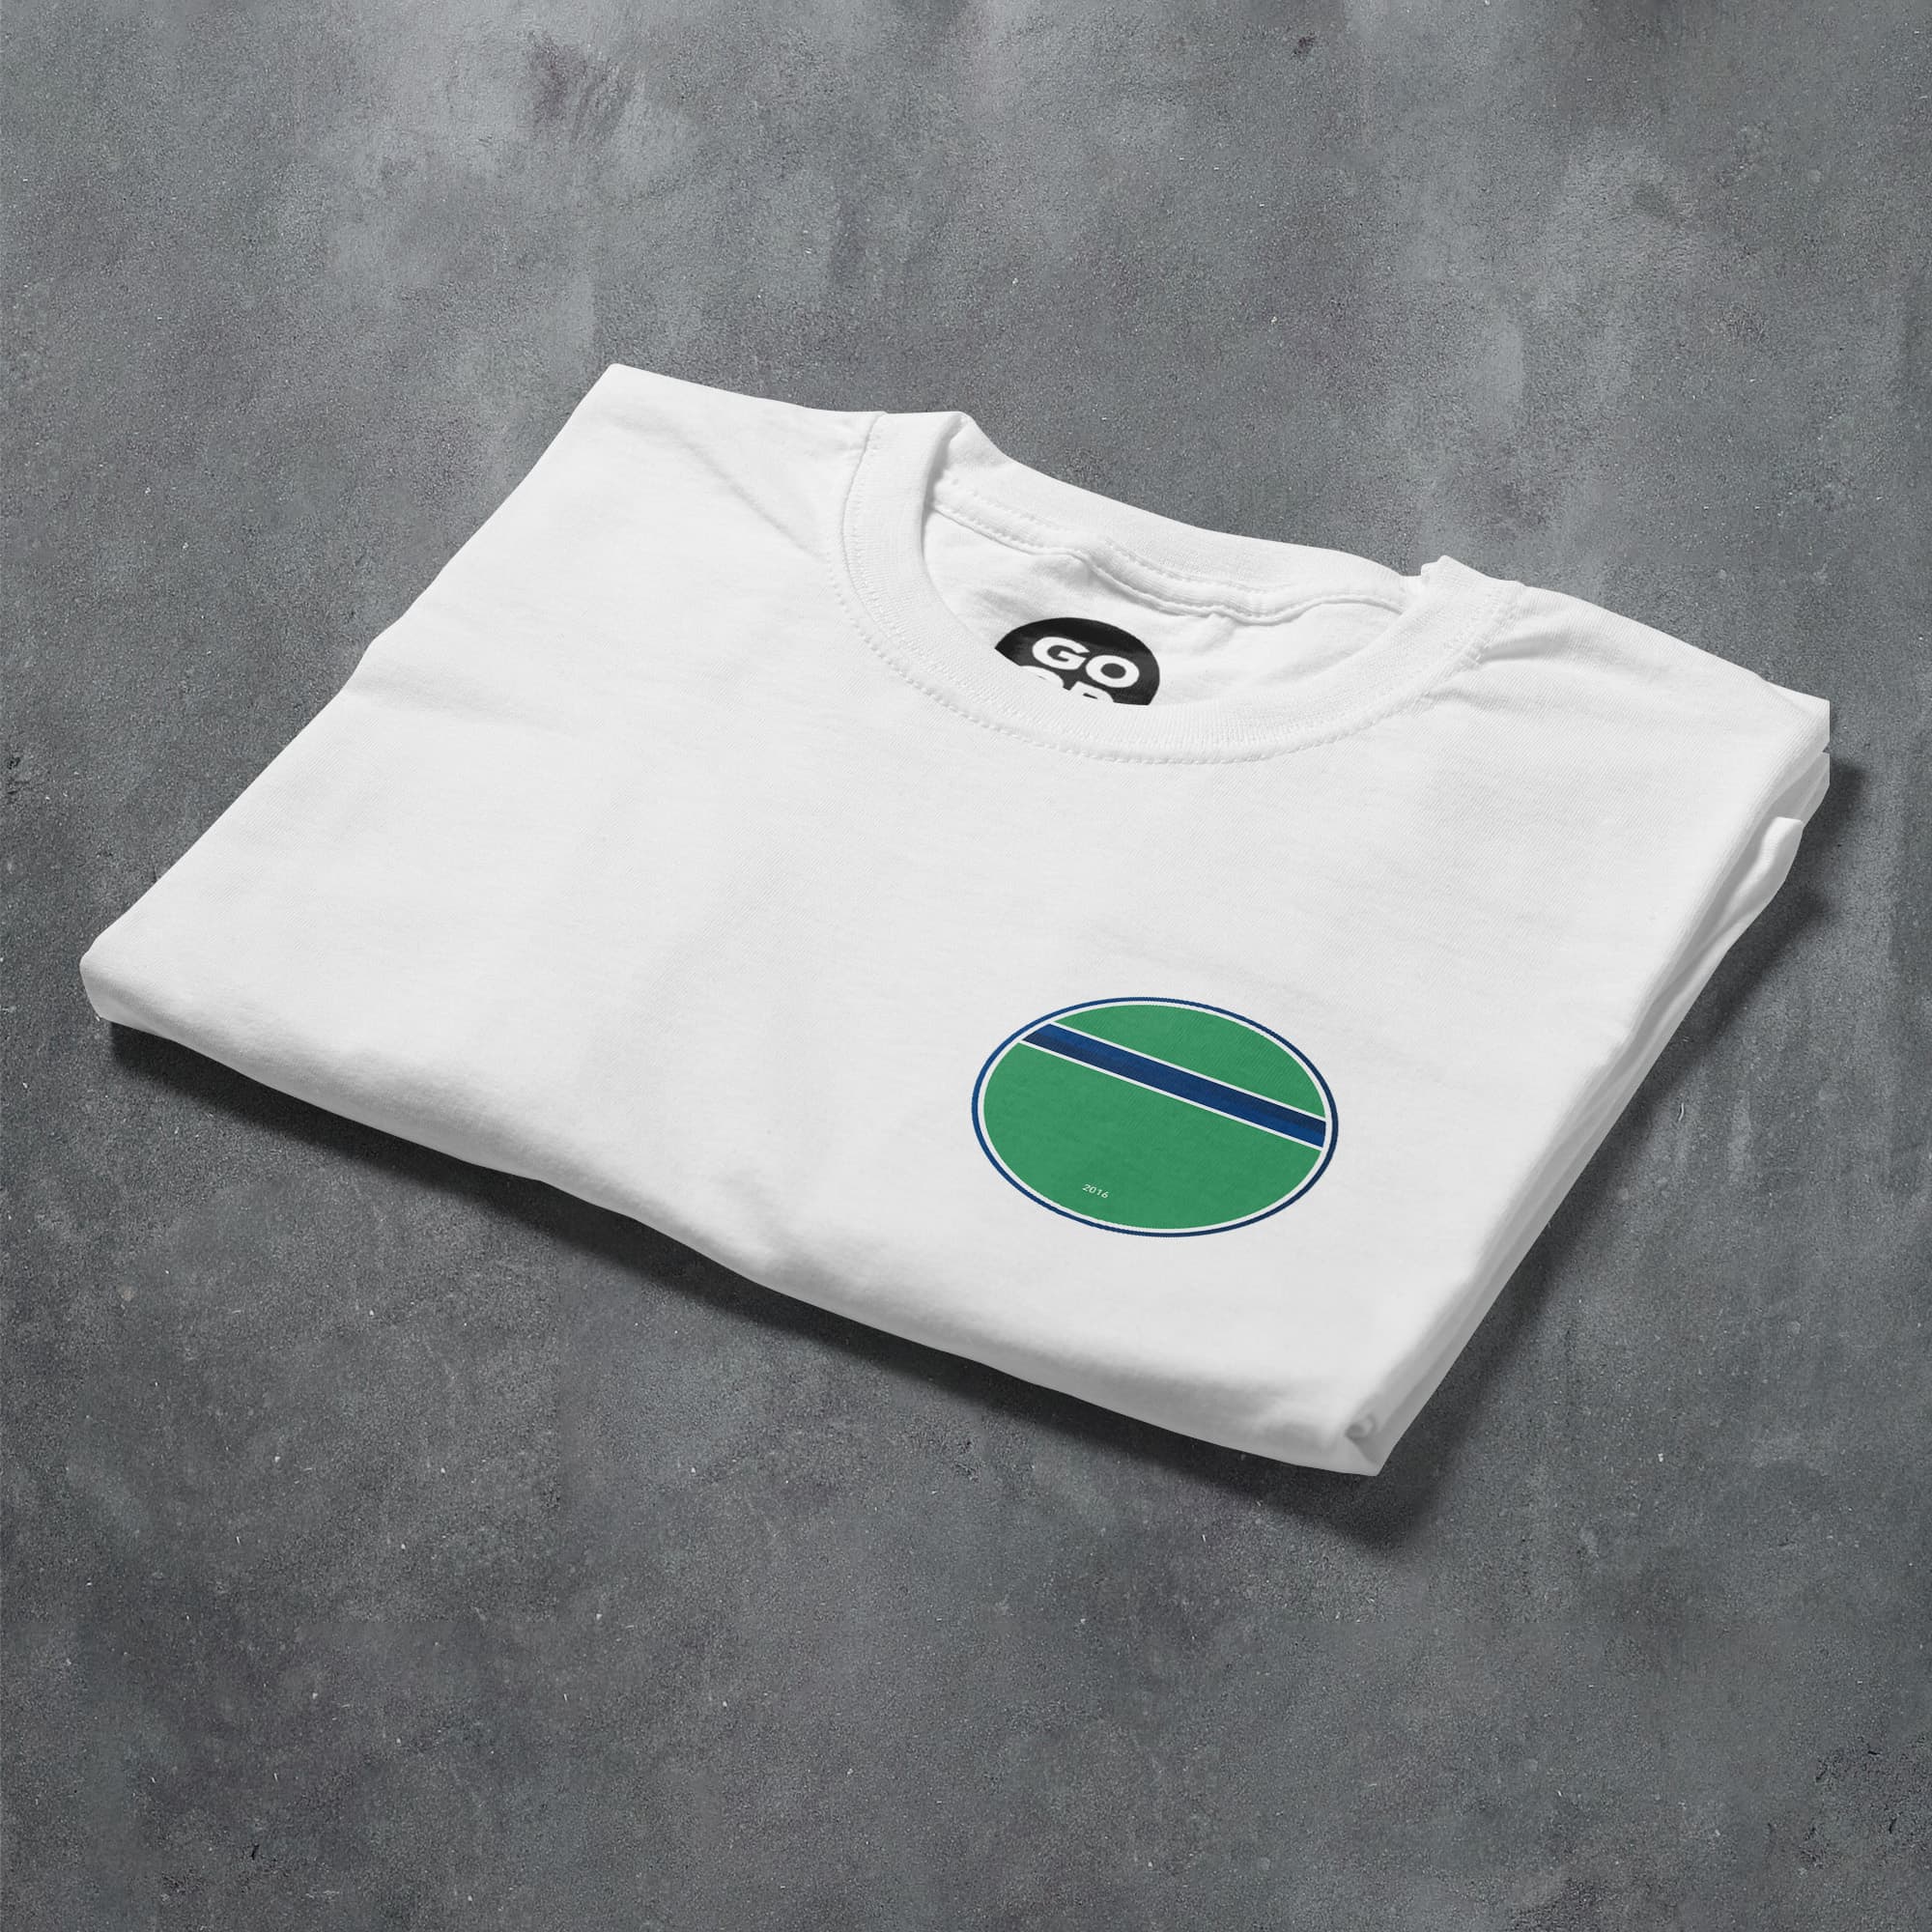 a white t - shirt with a green circle on it